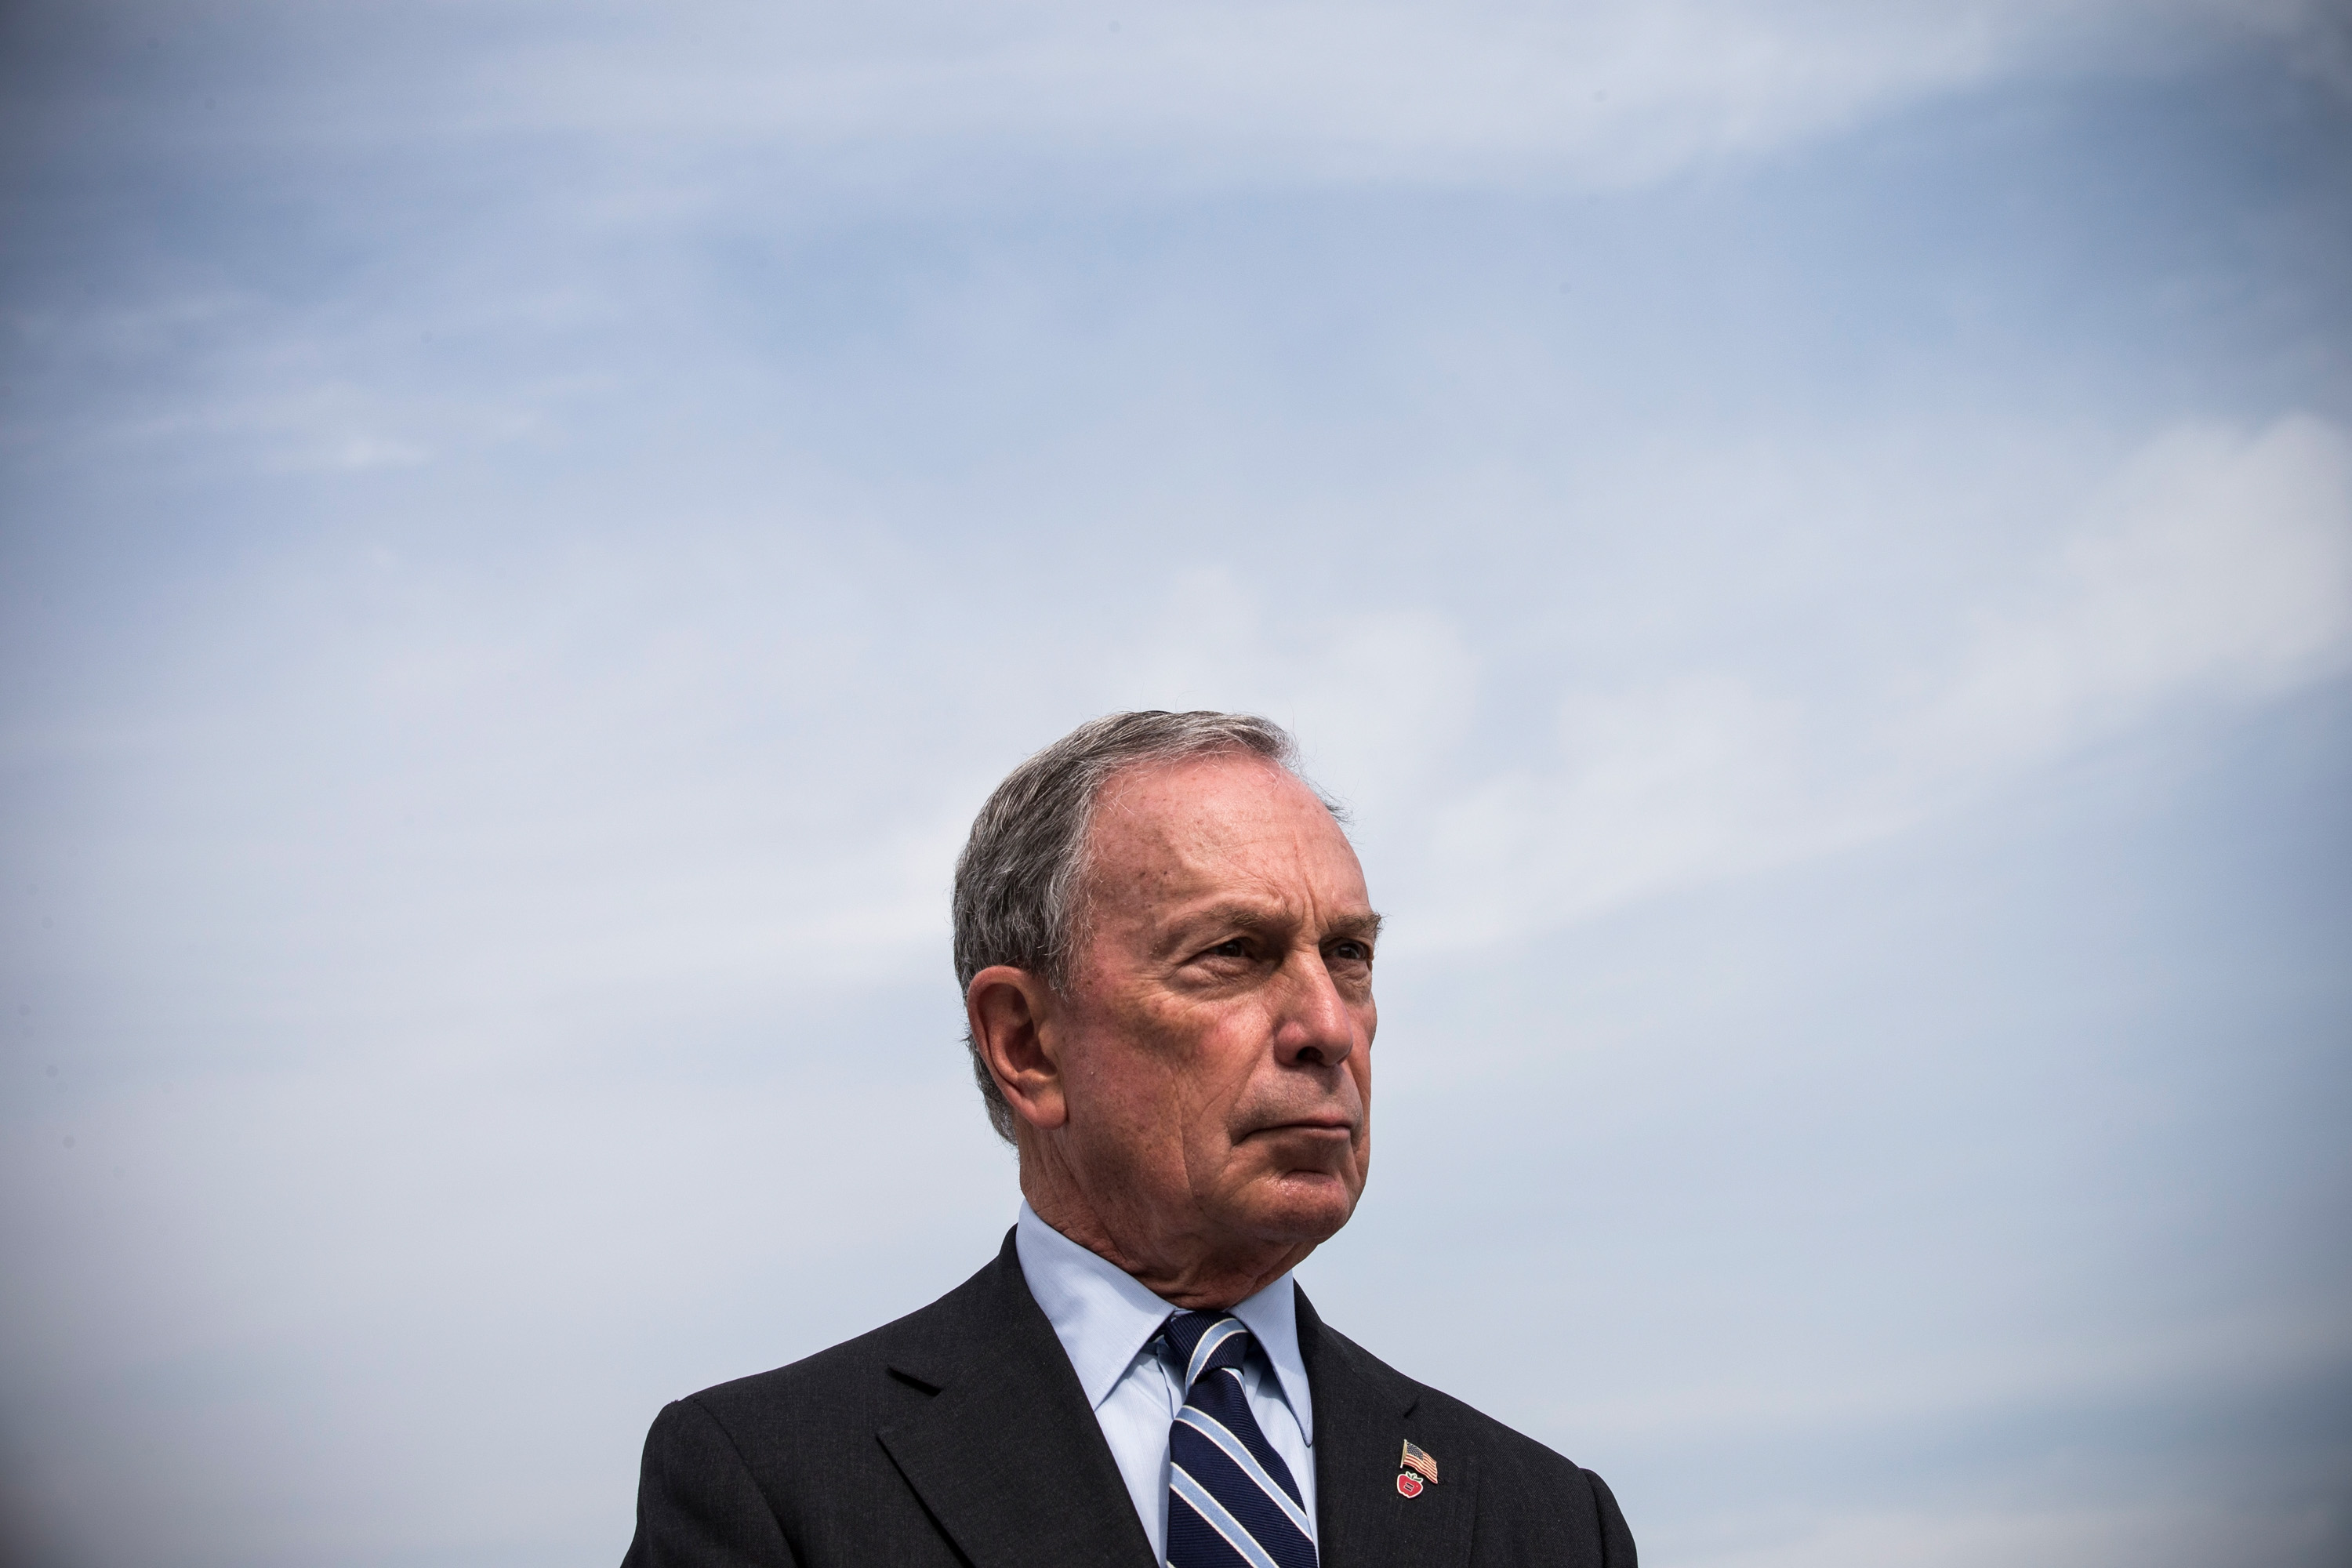 Former New York City Mayor Michael Bloomberg unveils a Hurricane Sandy Recovery Report at a press conference with U.S. Secretary for Housing and Urban Development Shaun Donovan (not seen) on Aug. 19, 2013 in the Brooklyn Borough of New York City. (Andrew Burton—Getty Images)